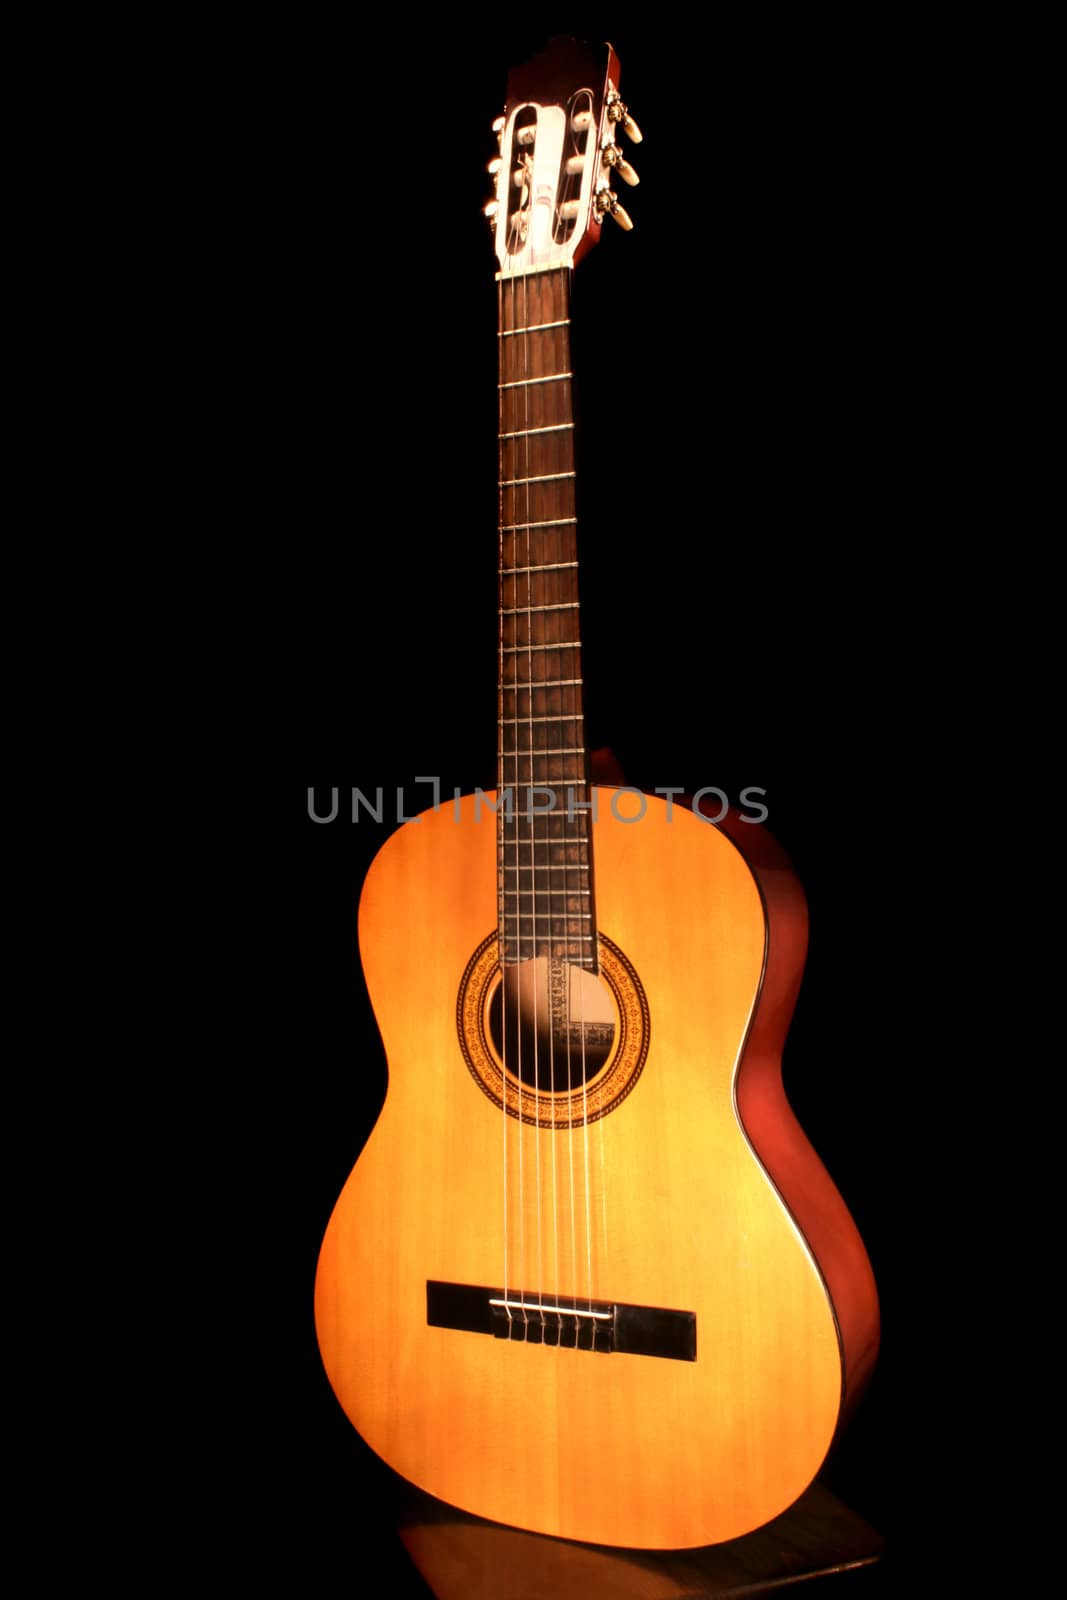 the acoustic guitar on the black background